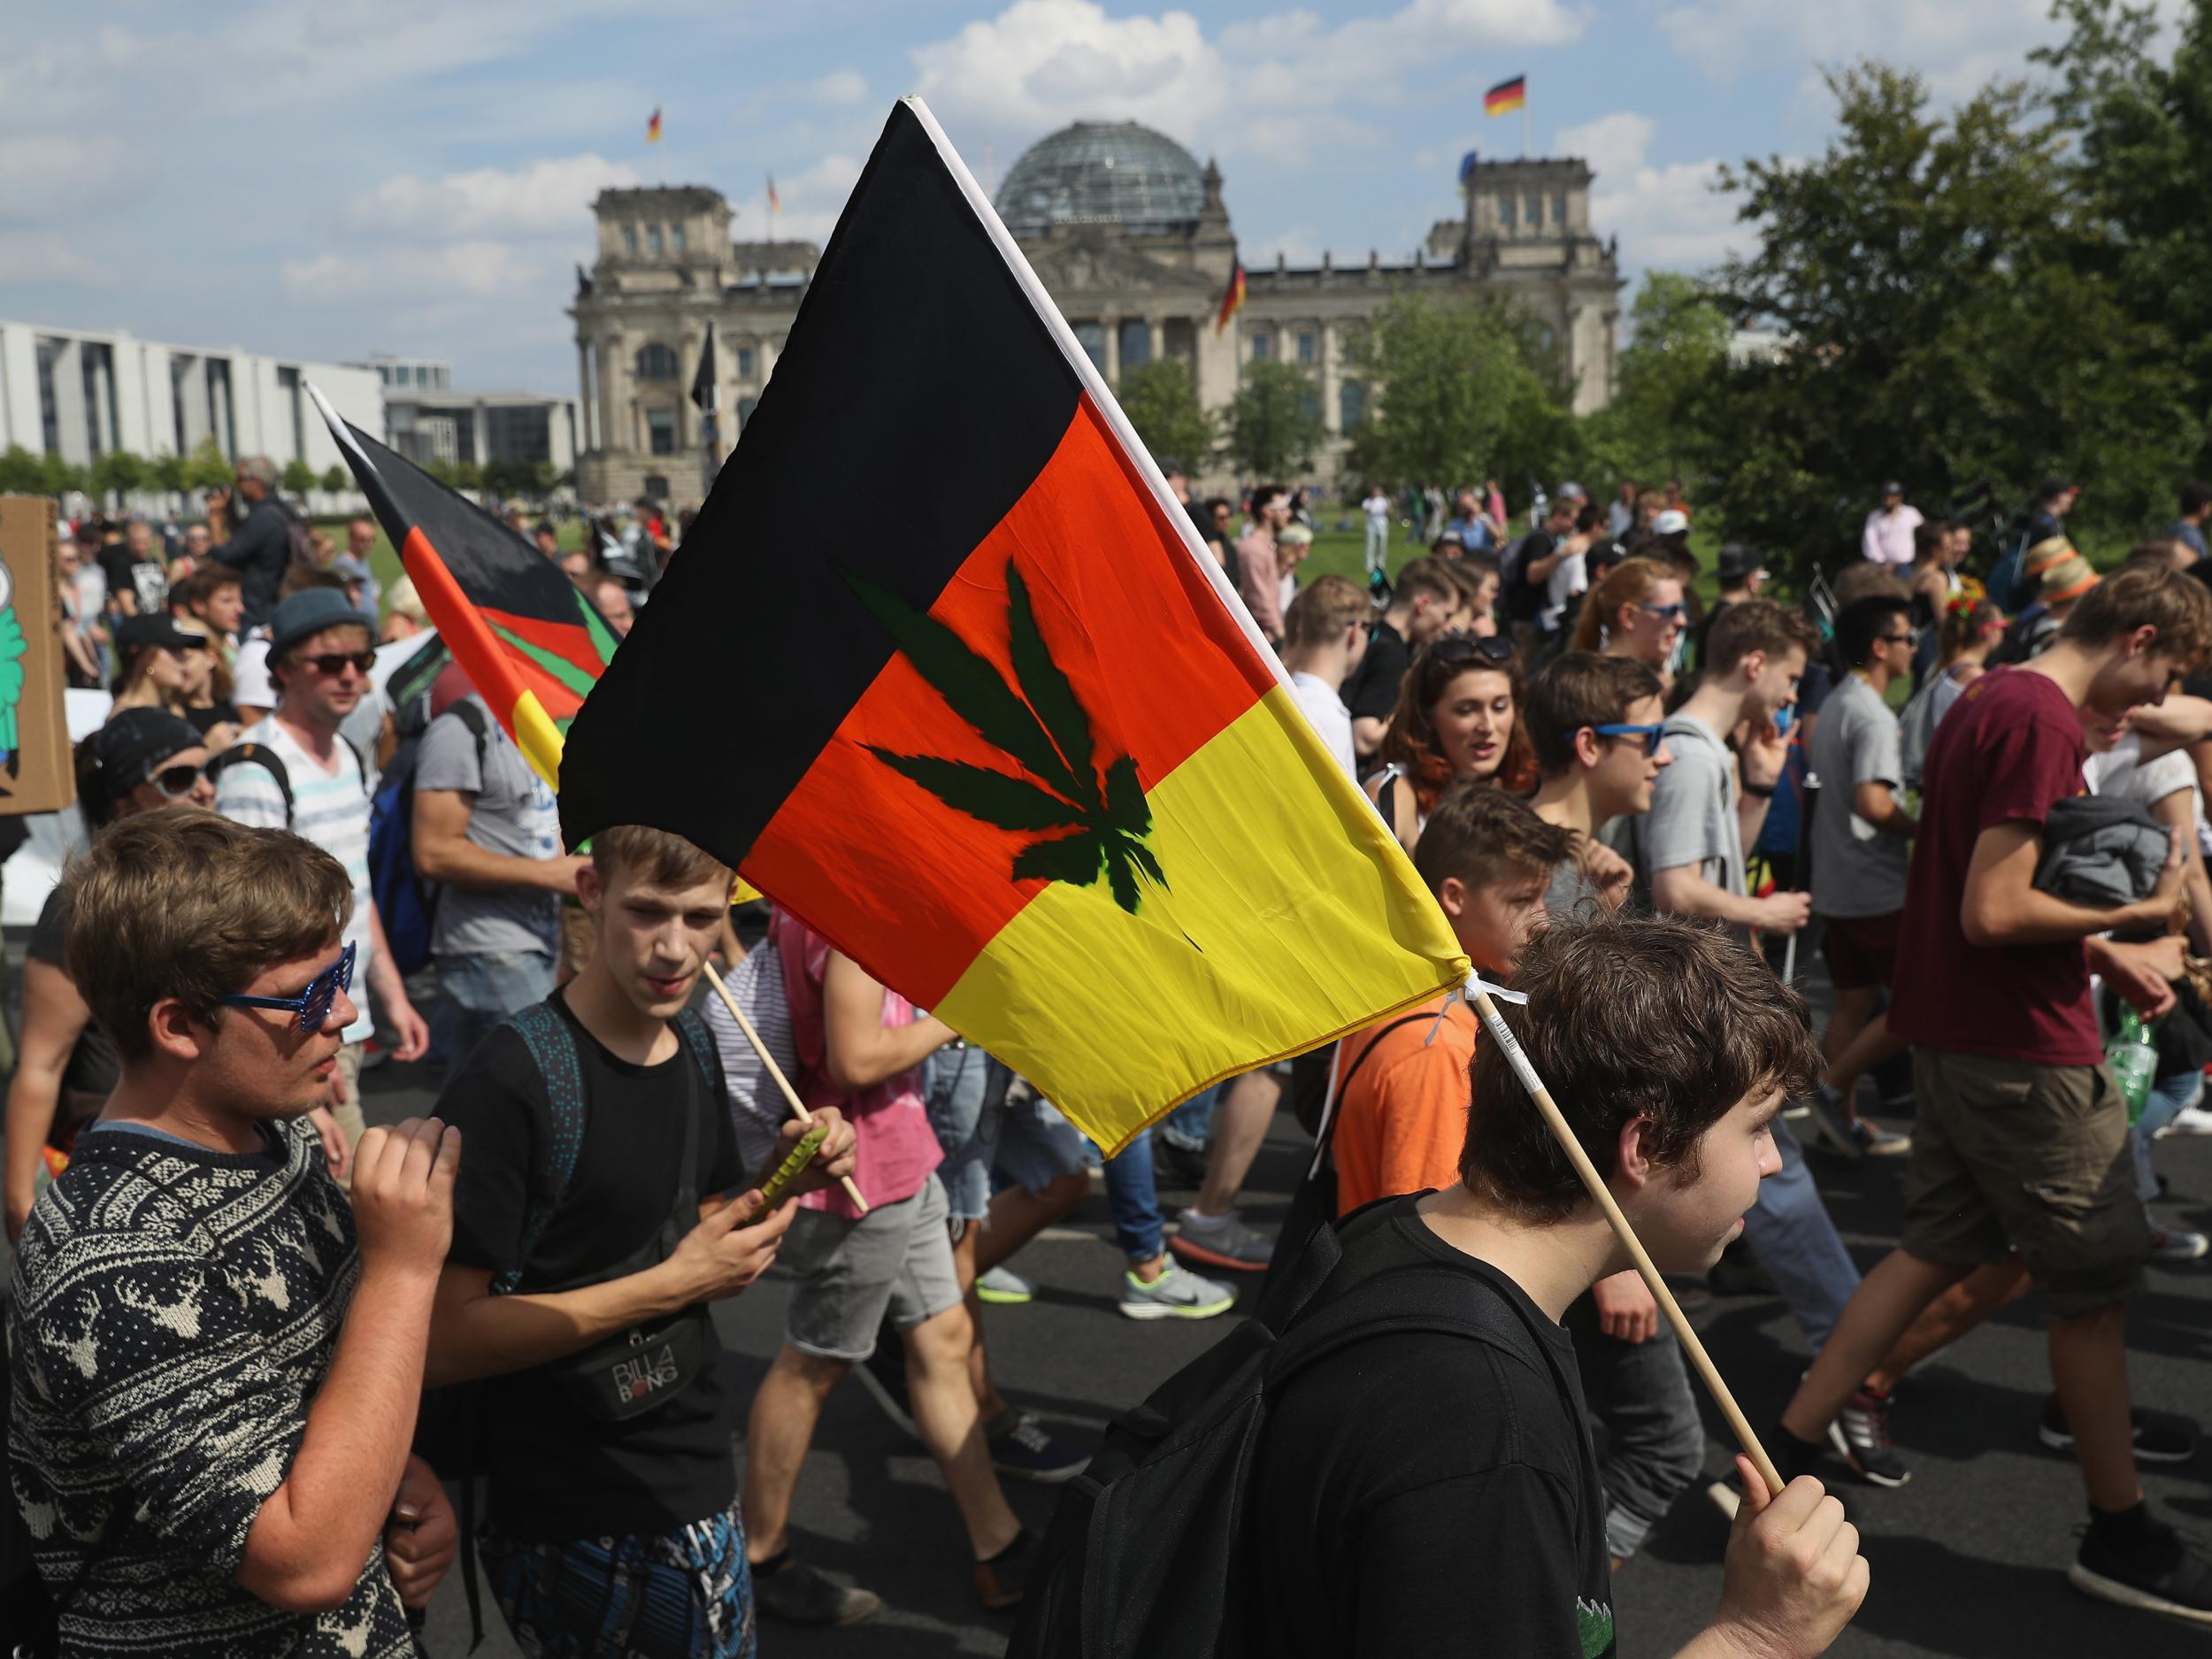 Activists, including two waving German flags that have a marijuana leaf painted on them, demand the legalisation of marijuana while marching past the Reichstag during the annual Hemp Parade (Hanfparade) on 13 August 2016 in Berlin